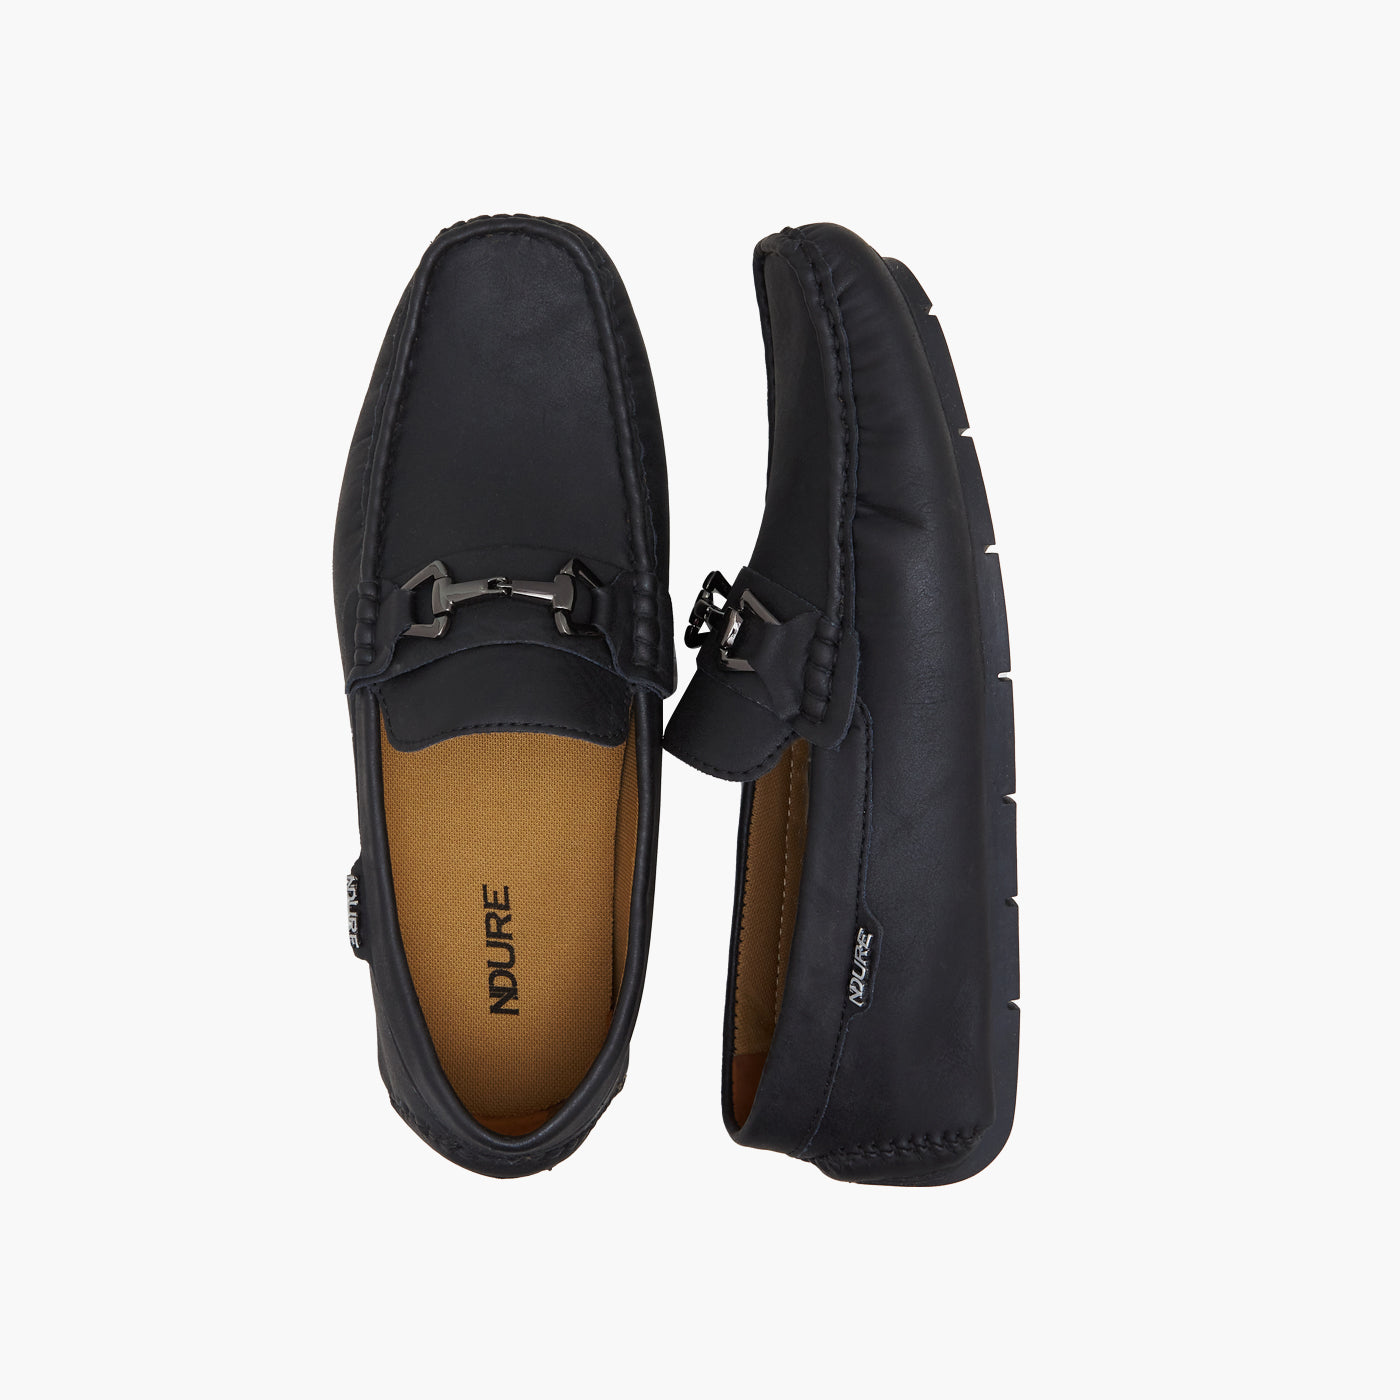 Best loafer shoes price in Pakistan